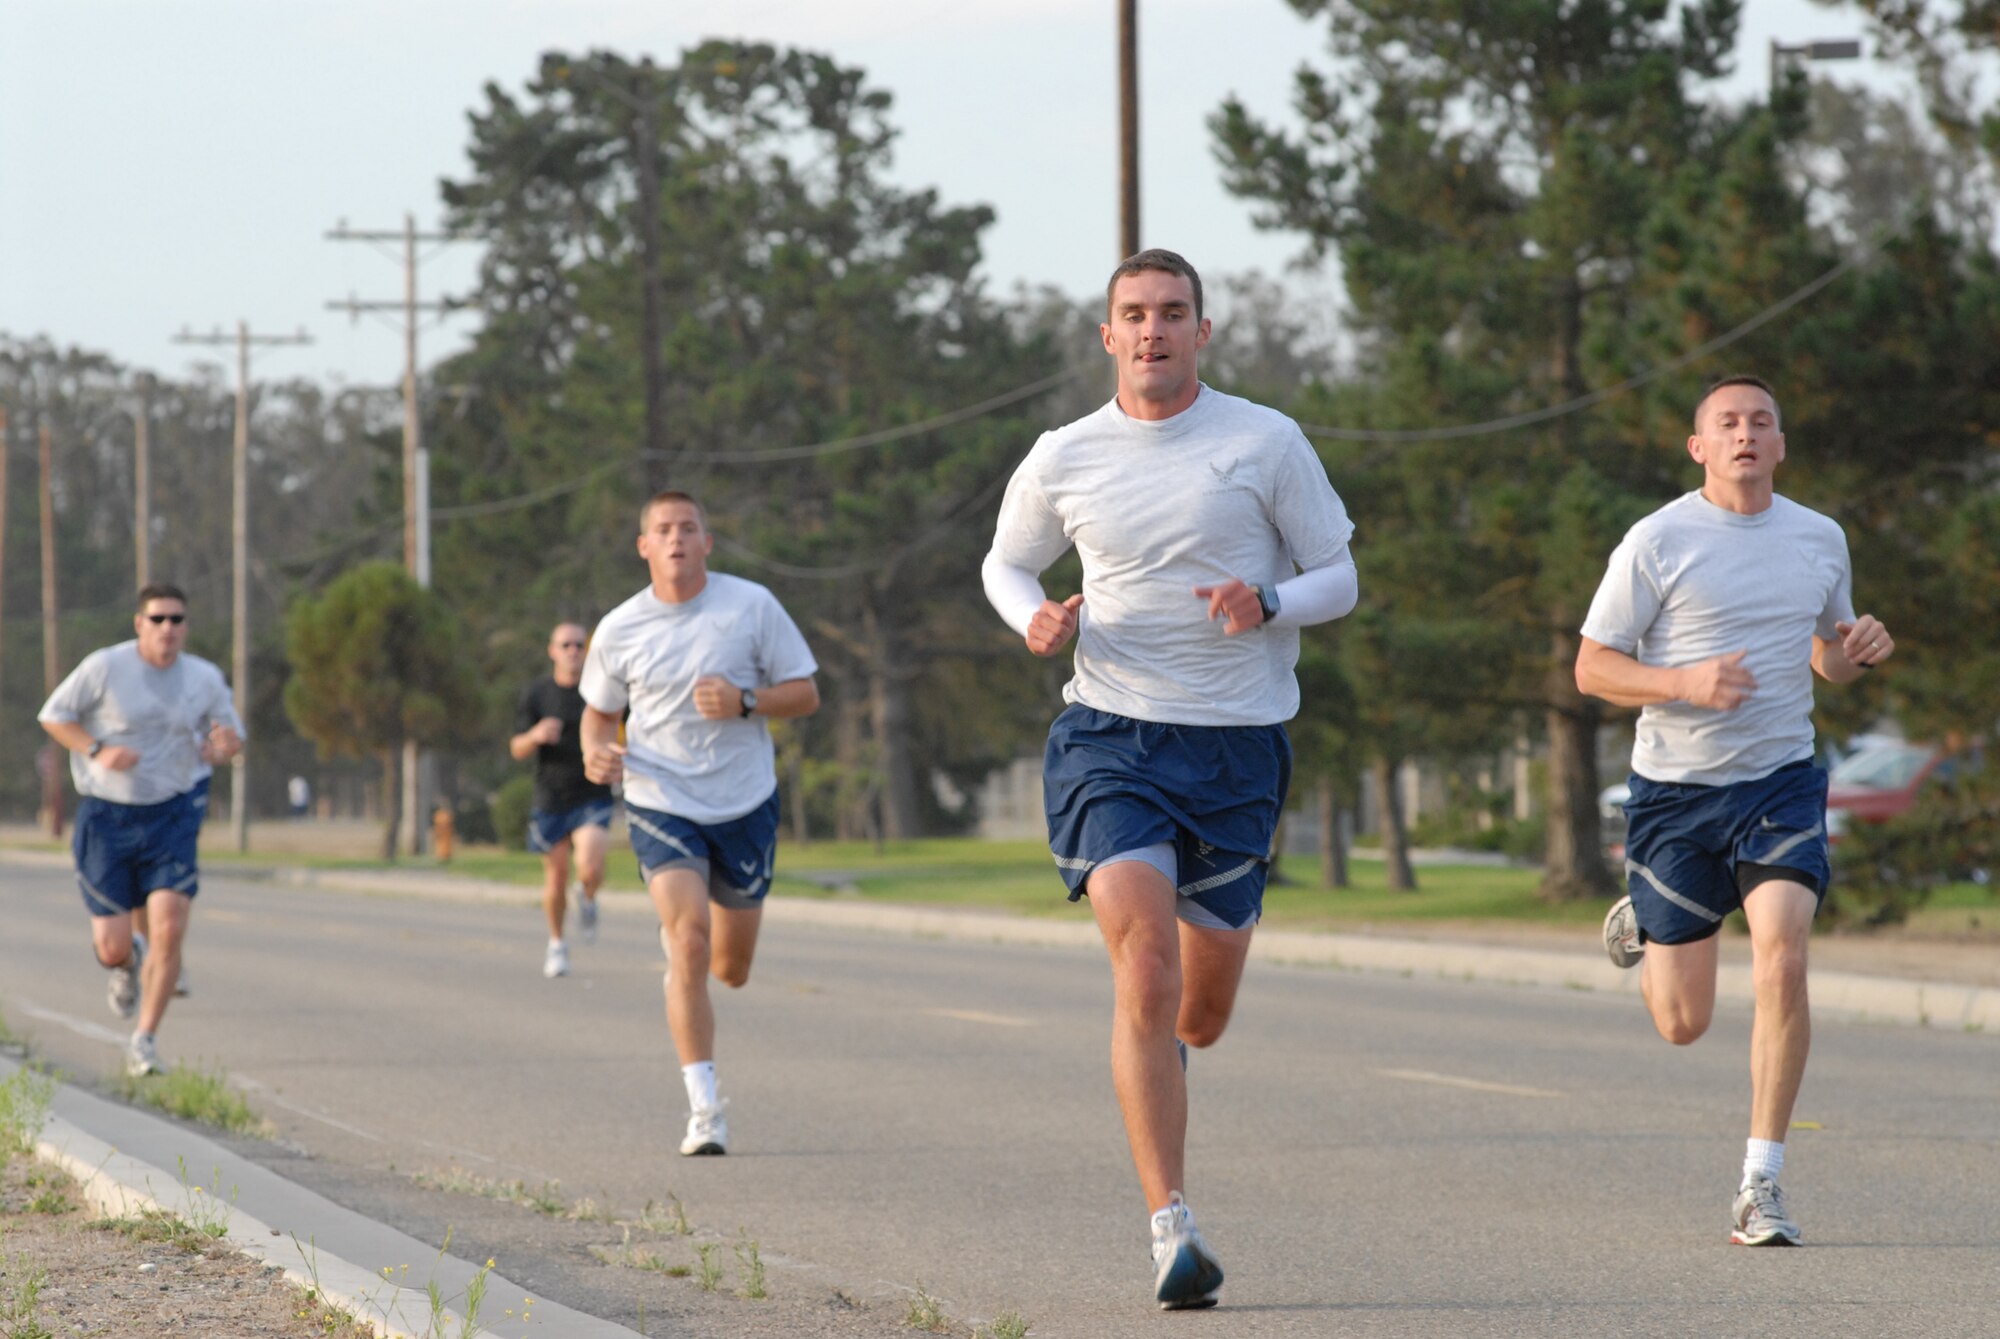 VANDENBERG AIR FORCE BASE, Calif. – The 30th Space Wing participates in the monthly Fit-to-Fight Run here Aug. 28. Team V Airmen complete the run together to highlight the "Fit to Fight" force. The event is meant to encourage Airmen to maintain the Air Force's health and fitness standards. (U.S. Air Force photo/Airman 1st Class Angelina DellaRocco-Rukavina)